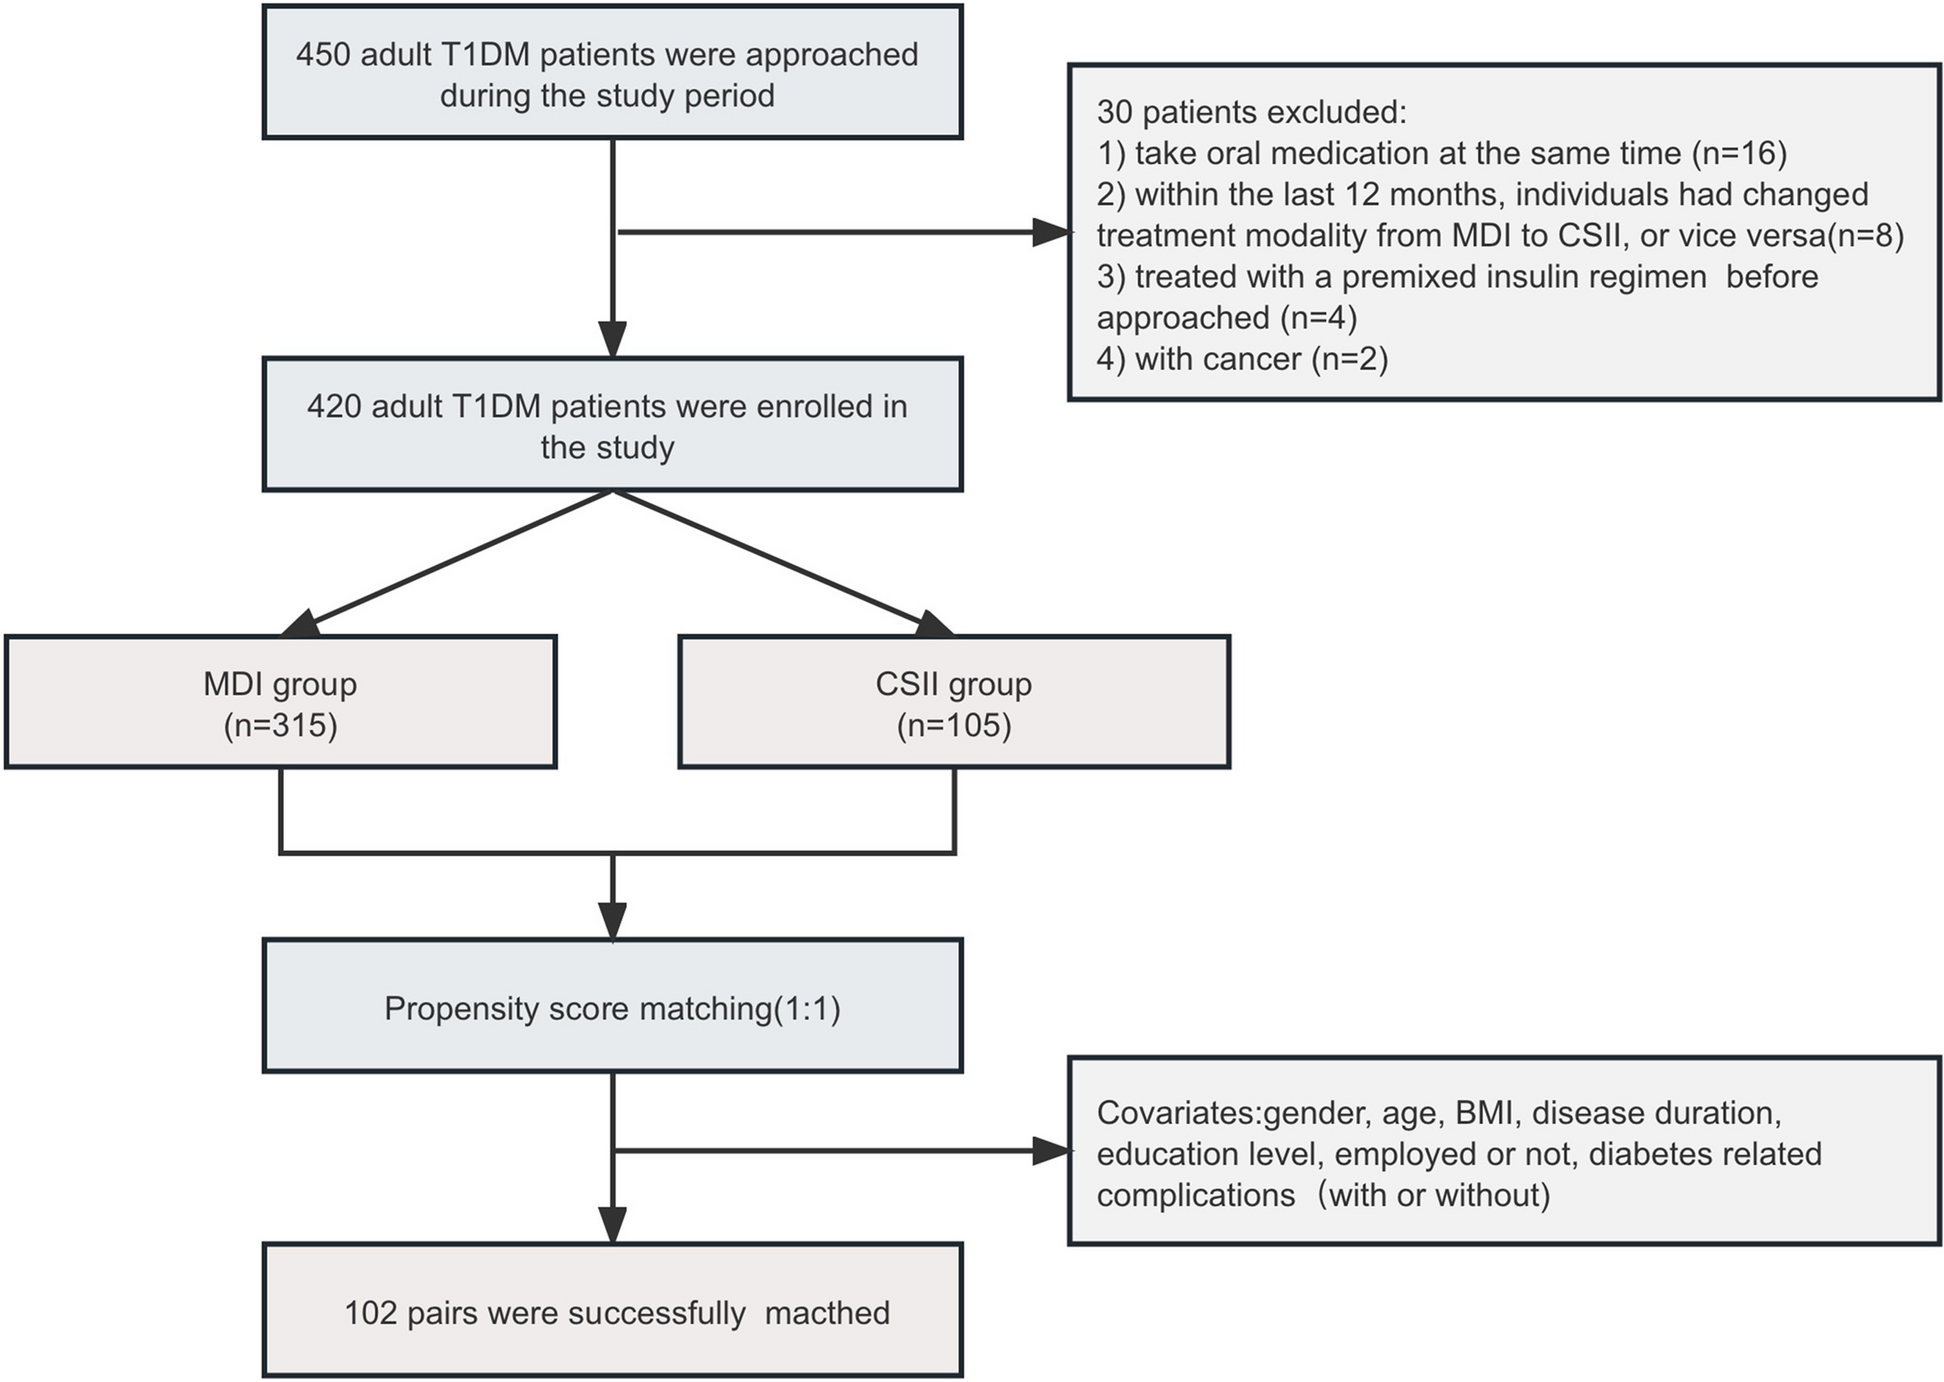 MDI versus CSII in Chinese adults with type 1 diabetes in a real-world situation: based on propensity score matching method